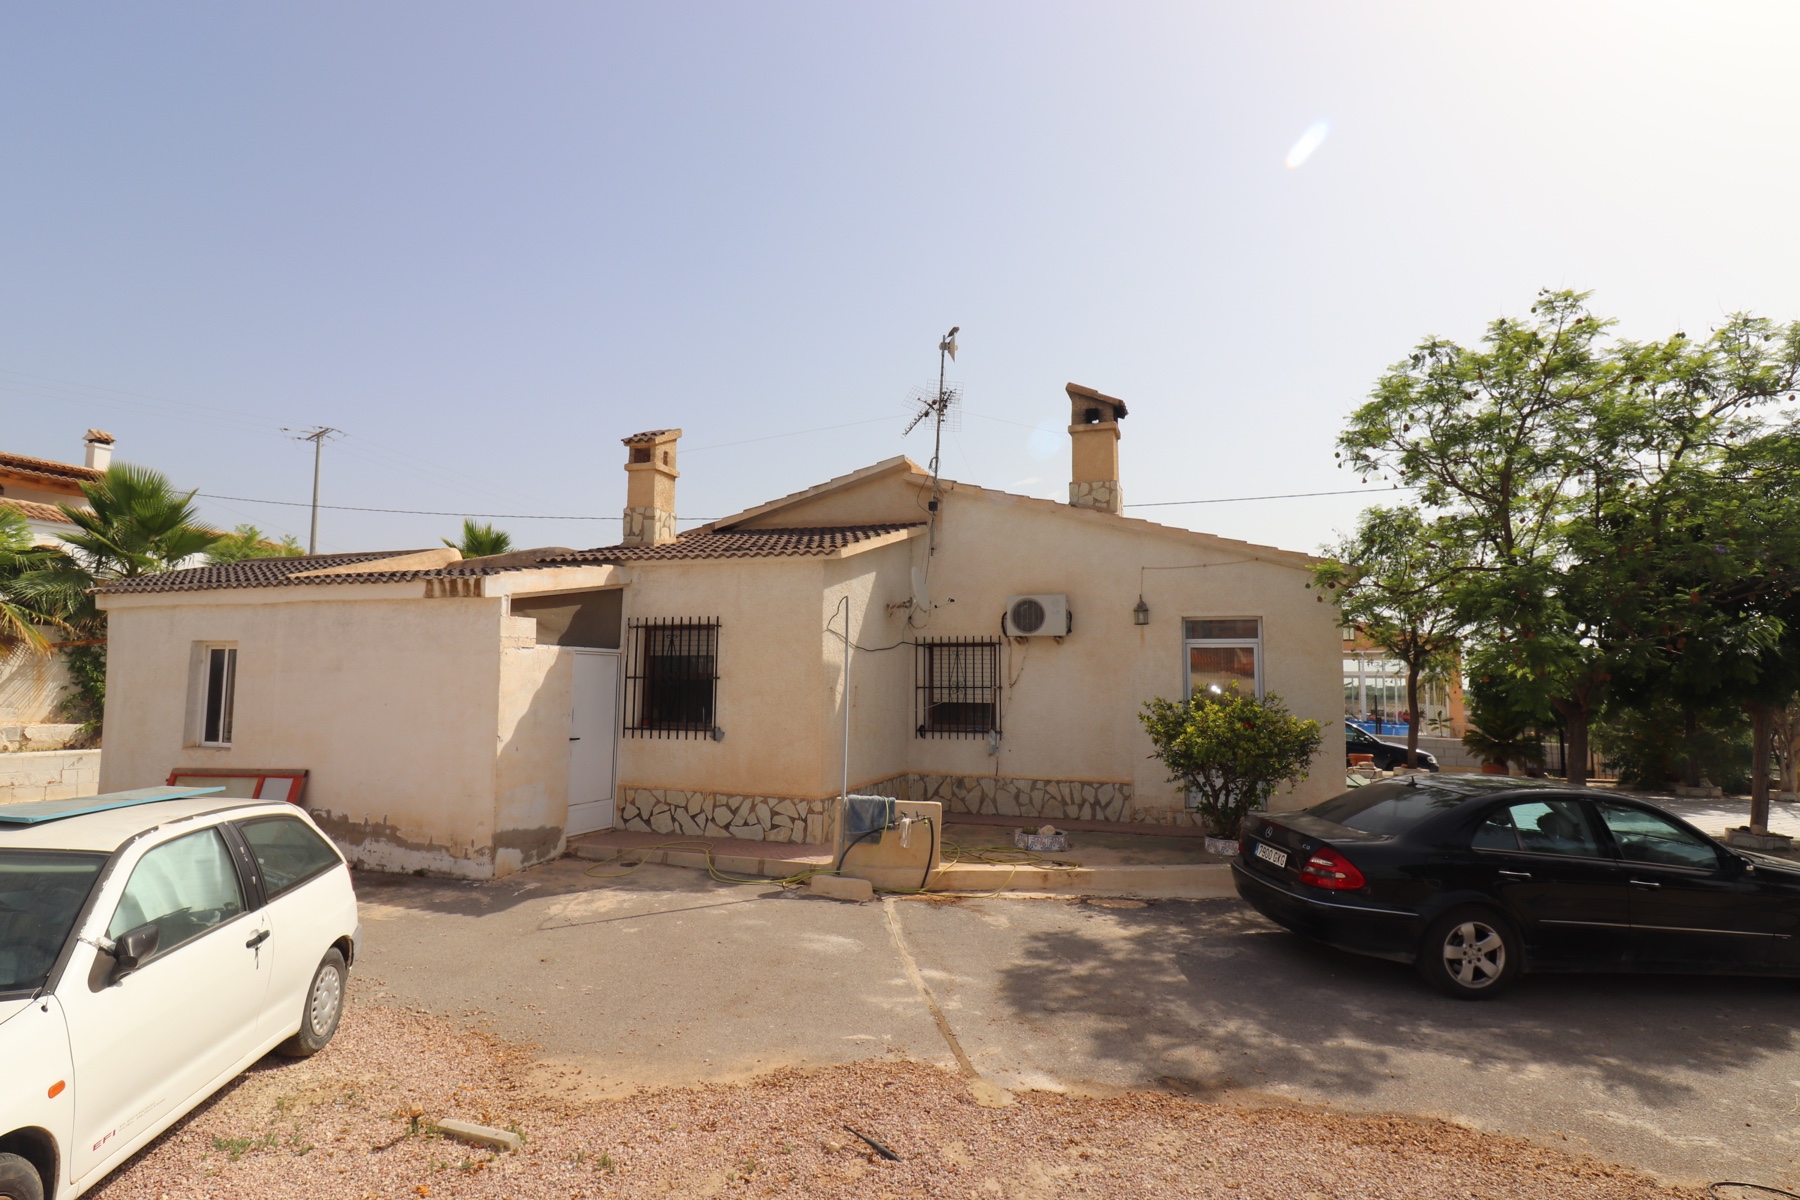 PCE-1340: Country Property for sale in Albatera